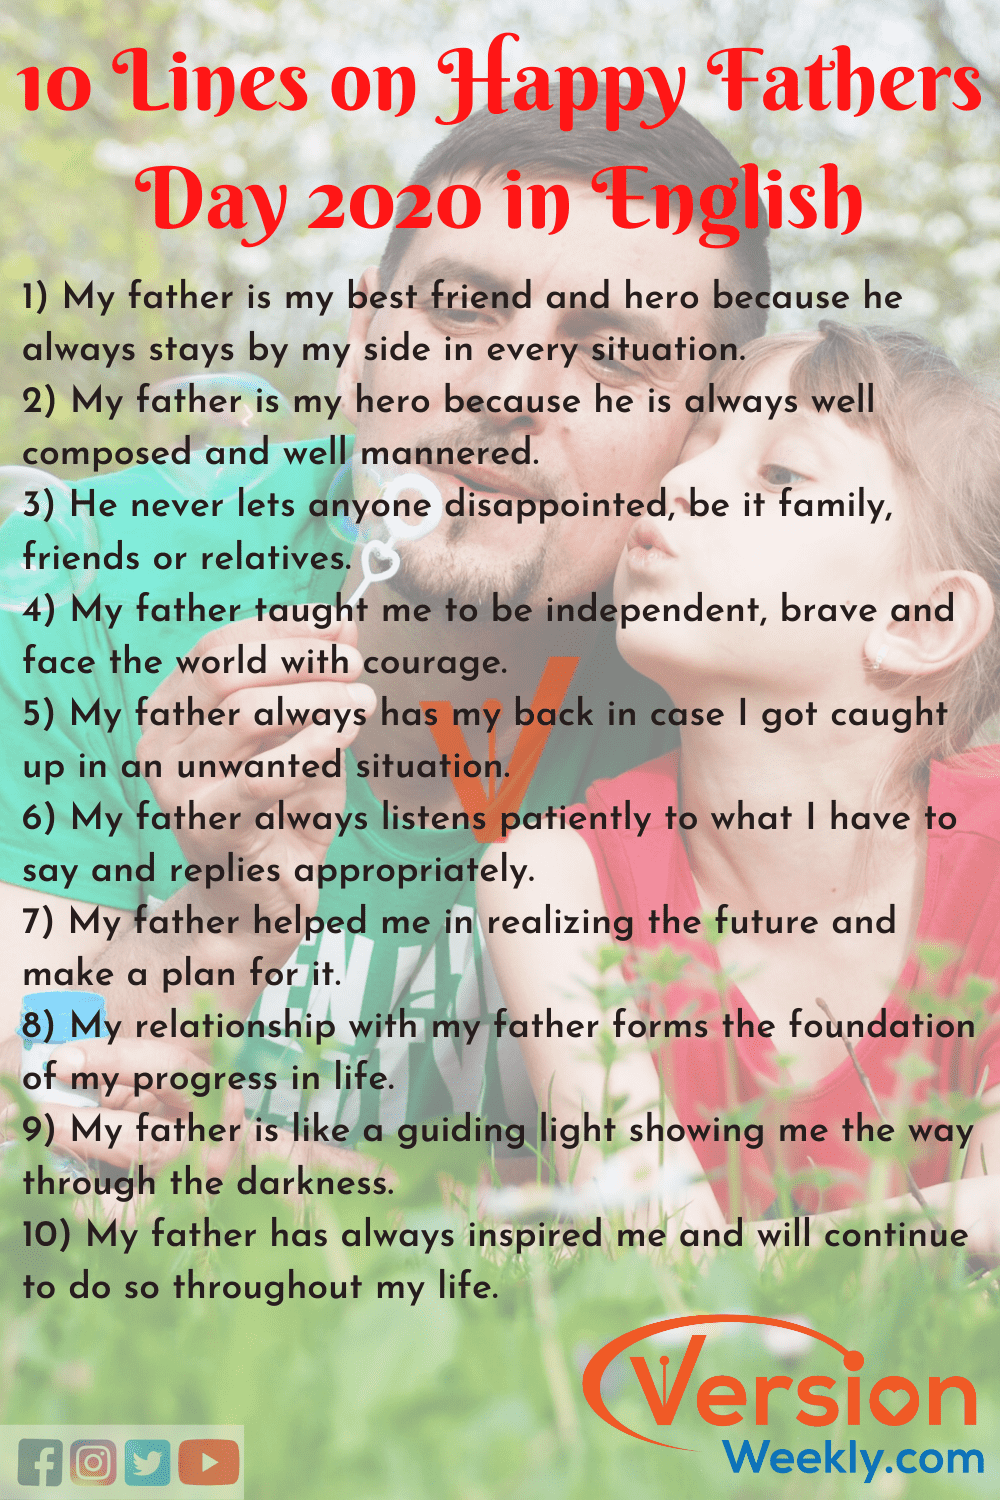 Ten lines on Fathers Day in English